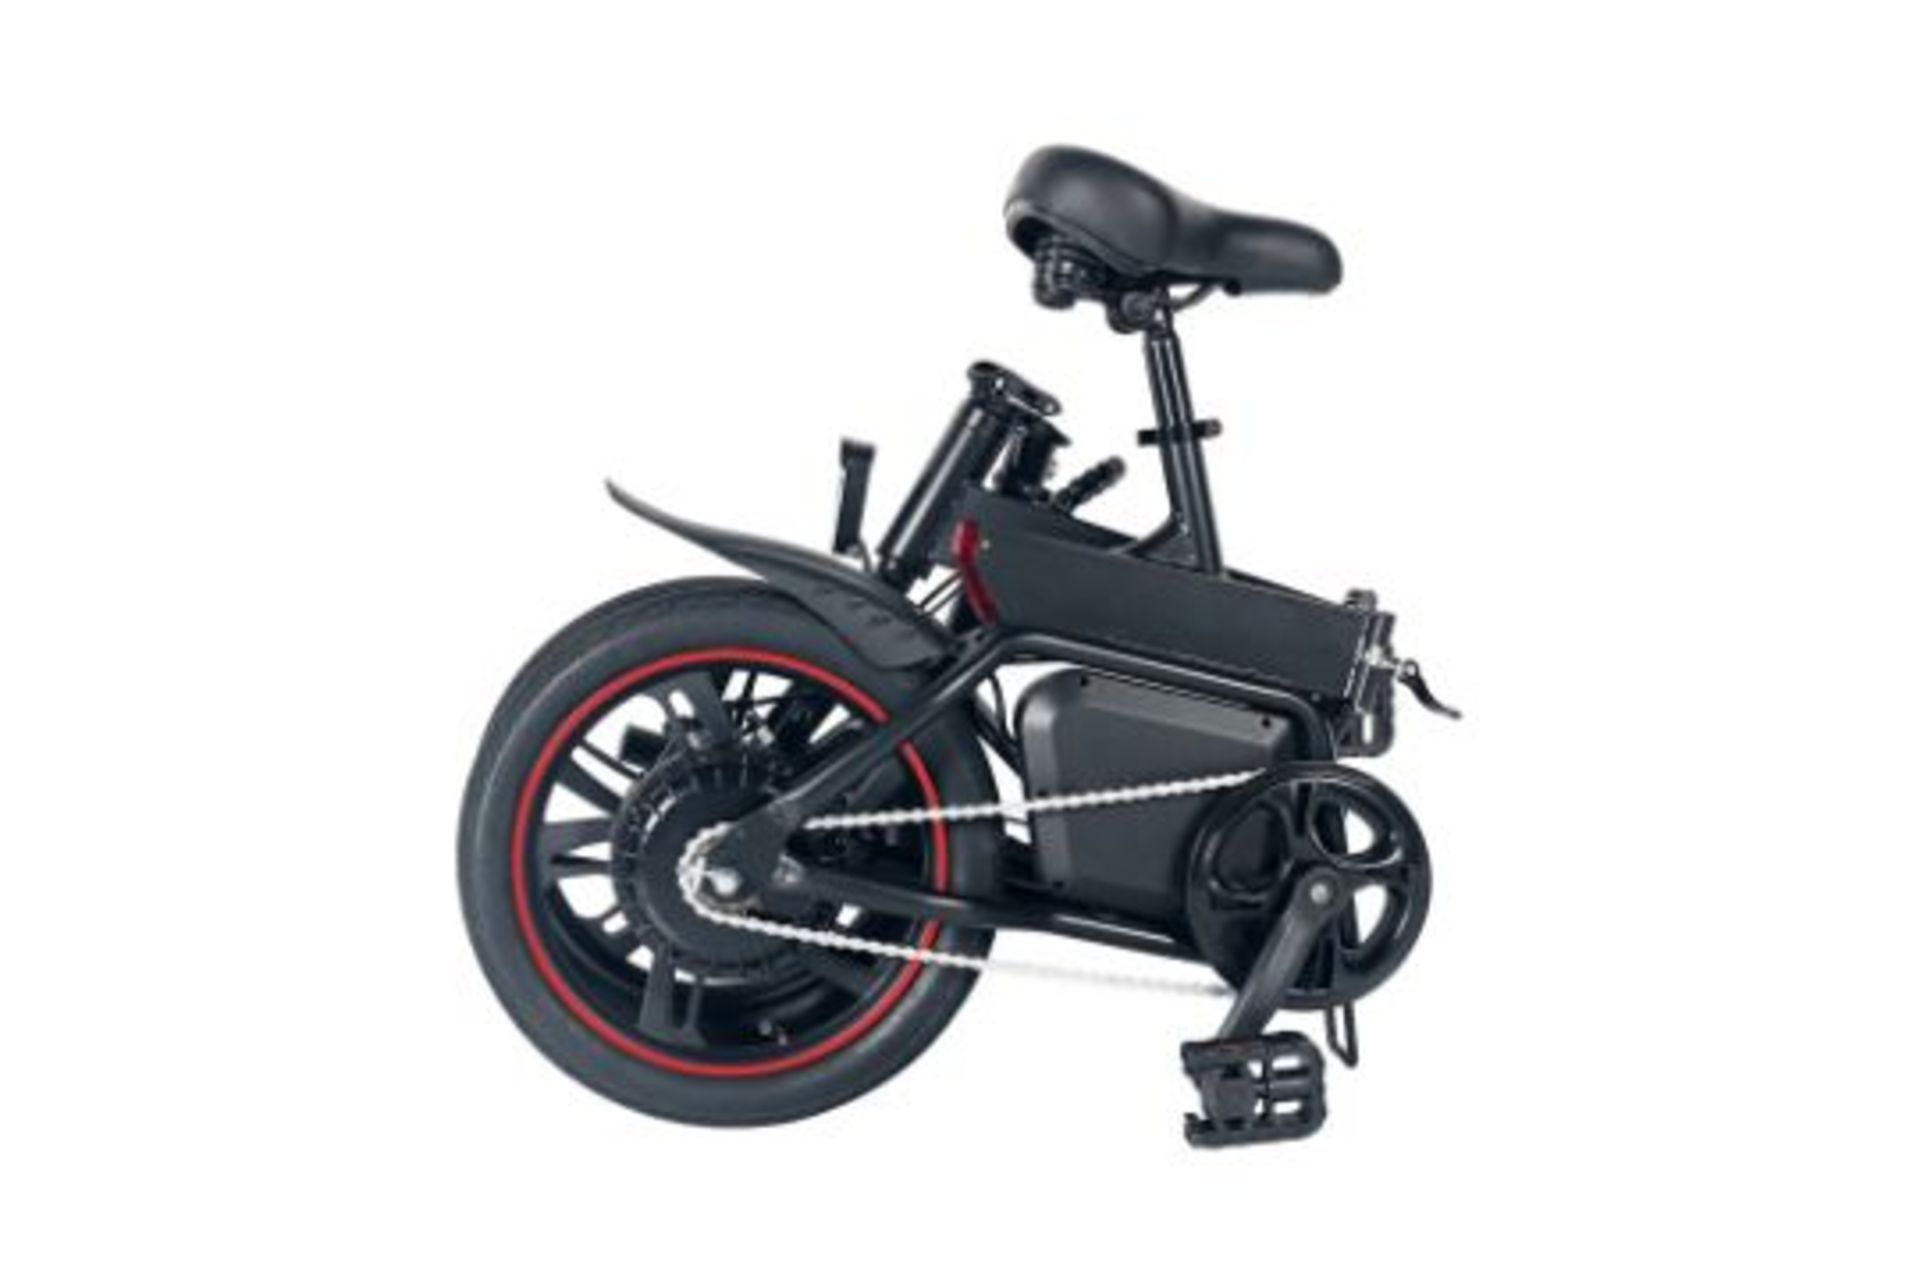 BRAND NEW Windgoo B20 Pro Electric Bike. RRP £1,100.99. With 16-inch-wide tires and a frame of - Image 2 of 3